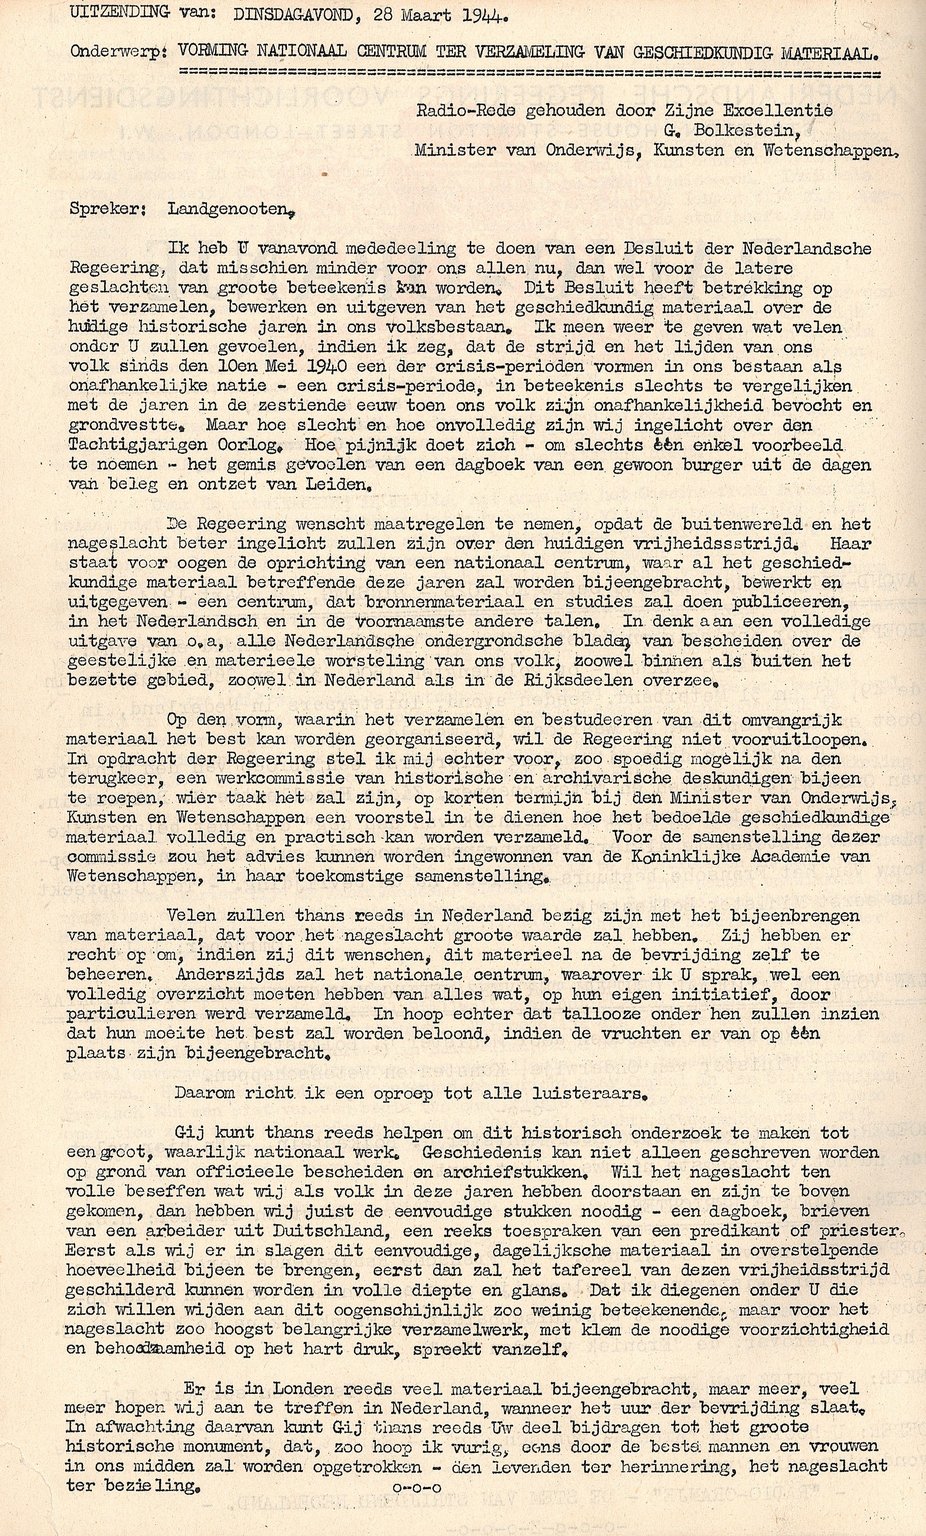 The speech by Minister Gerrit Bolkestein calling on the Dutch to hold on to their personal documents from the war (28 March 1944).